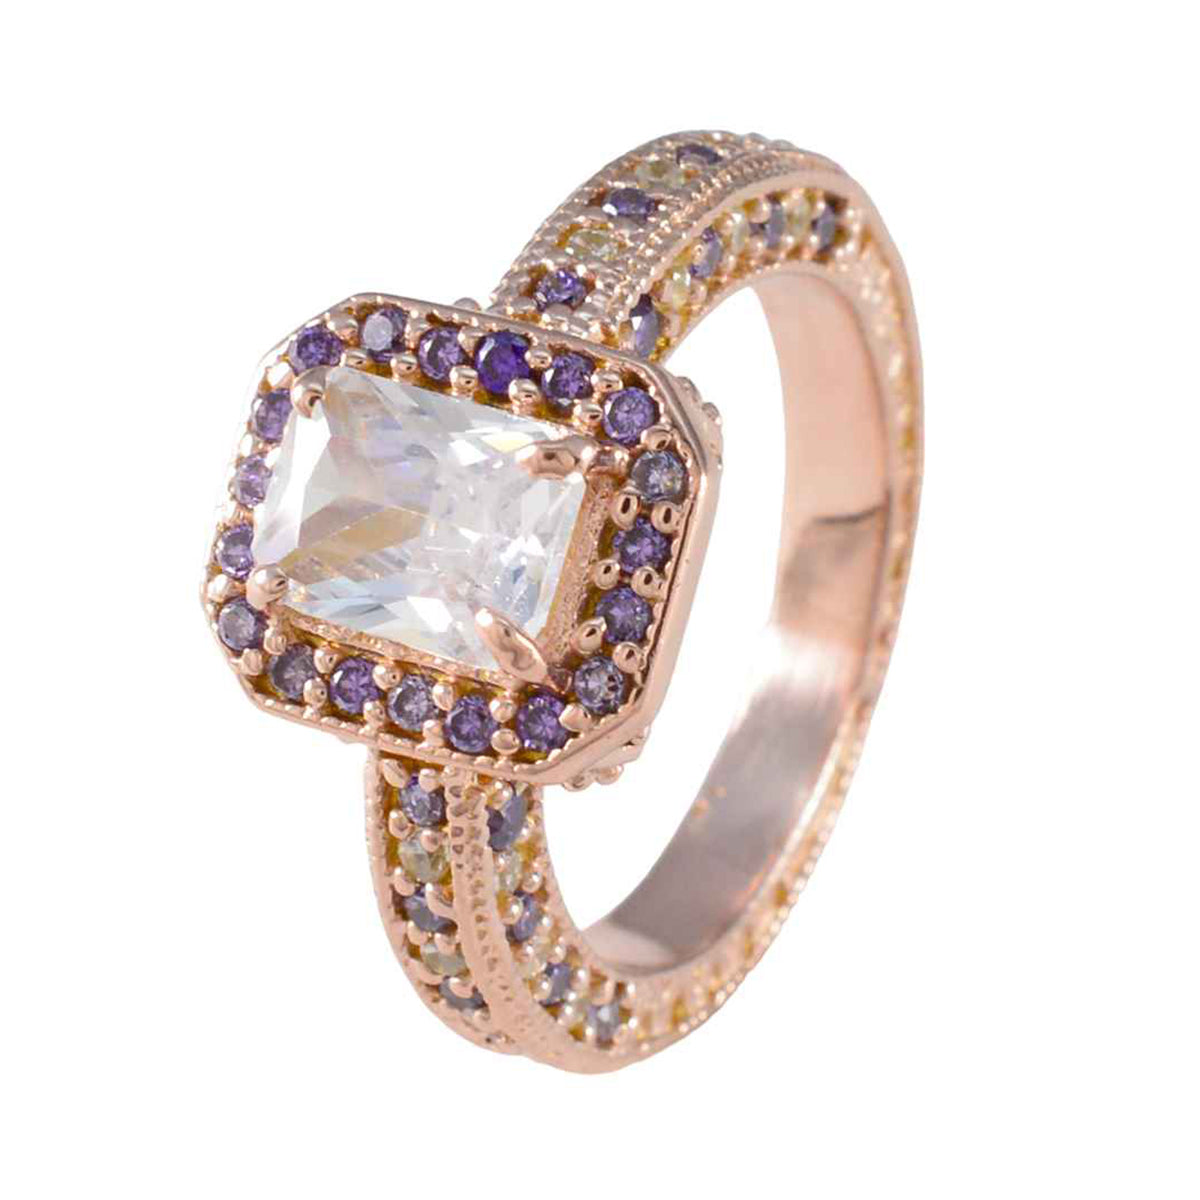 Riyo In Bulk Silver Ring With Rose Gold Plating Amethyst Stone Octagon Shape Prong Setting Stylish Jewelry Cocktail Ring